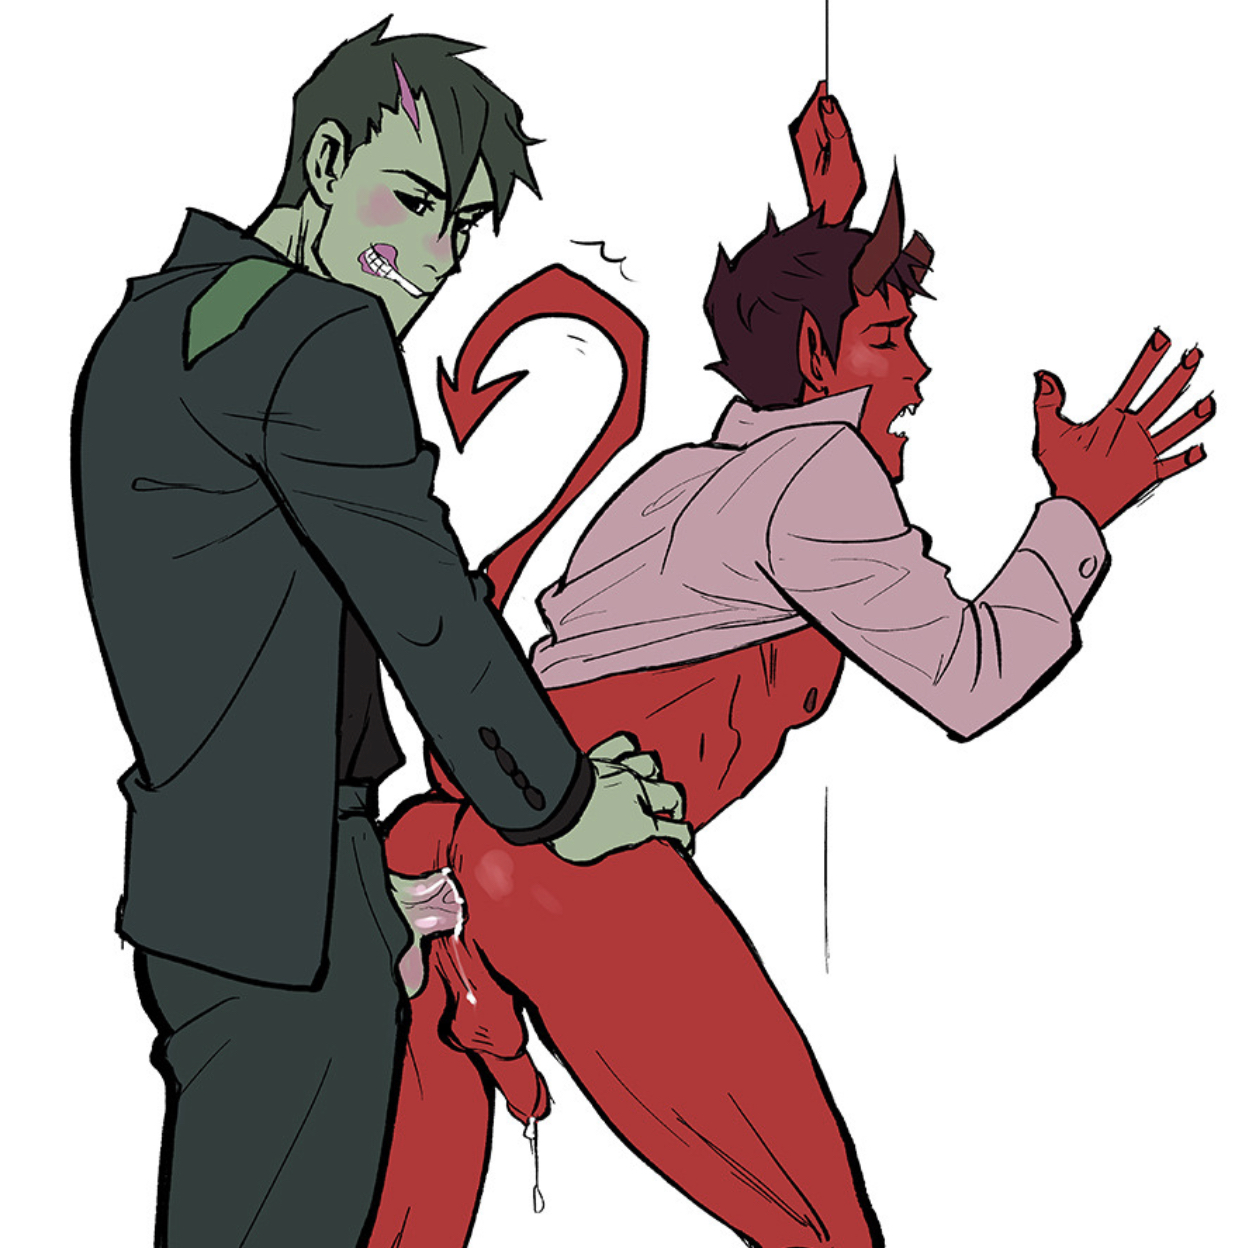 Monster prom gay porn